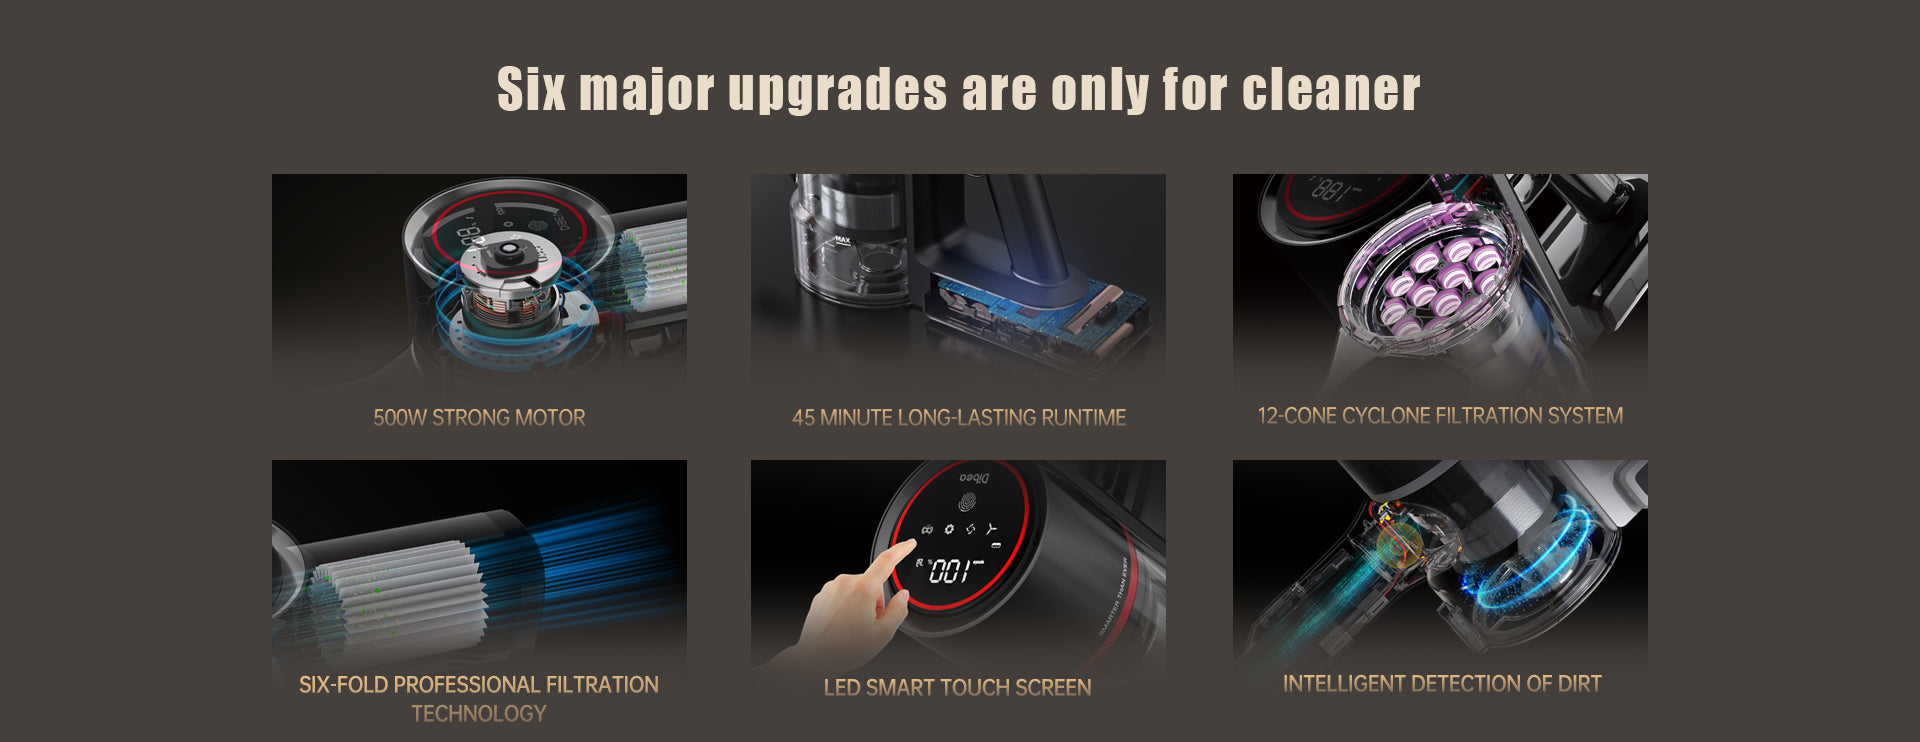 Six_major_upgrades_are_only_for_cleaner